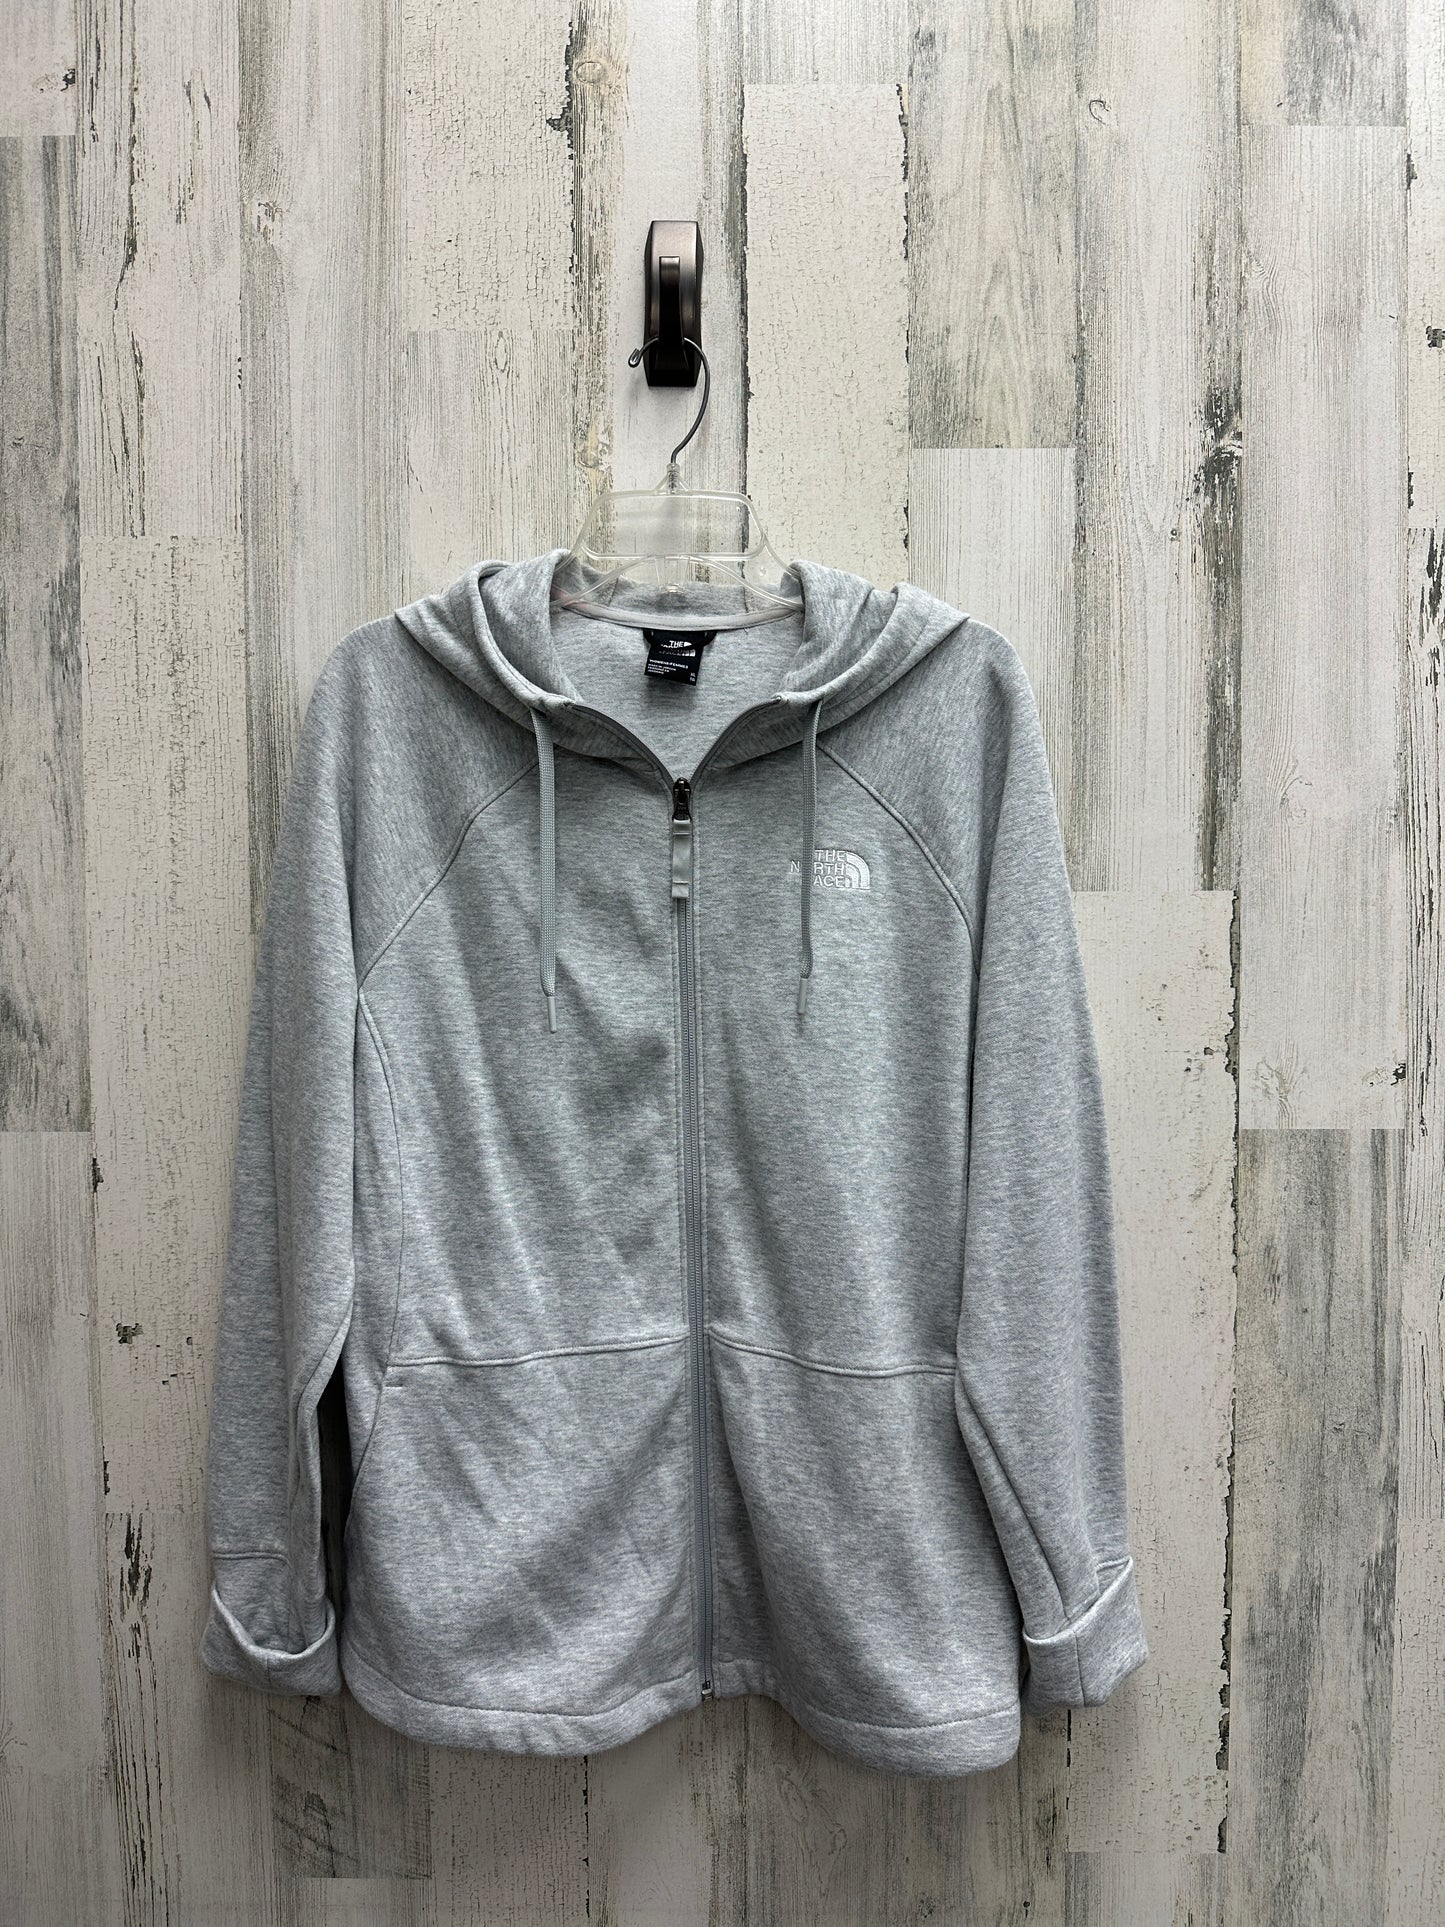 Sweatshirt Hoodie By North Face  Size: Xl